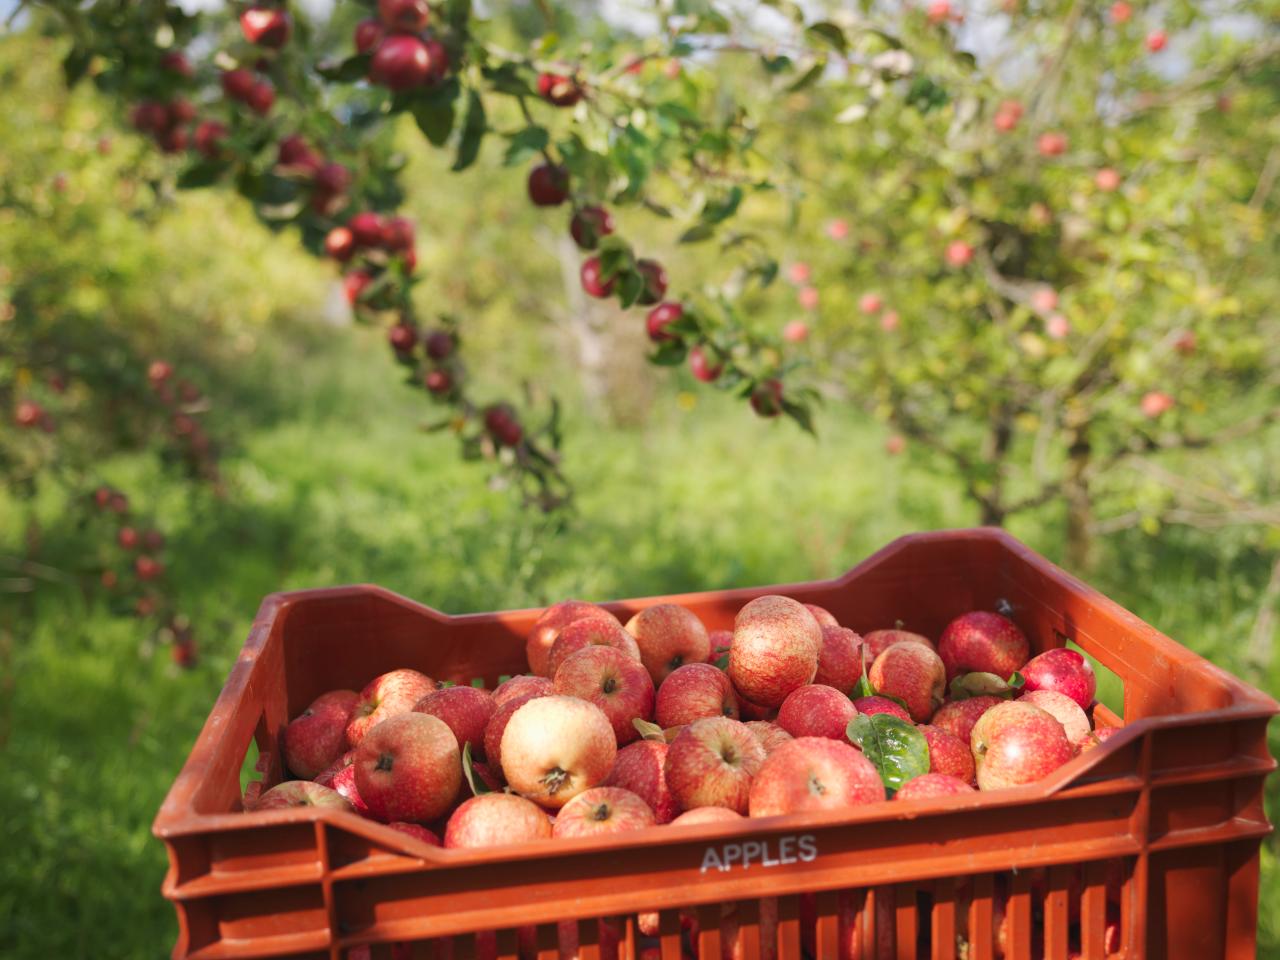 How To Store Freshly Picked Apples